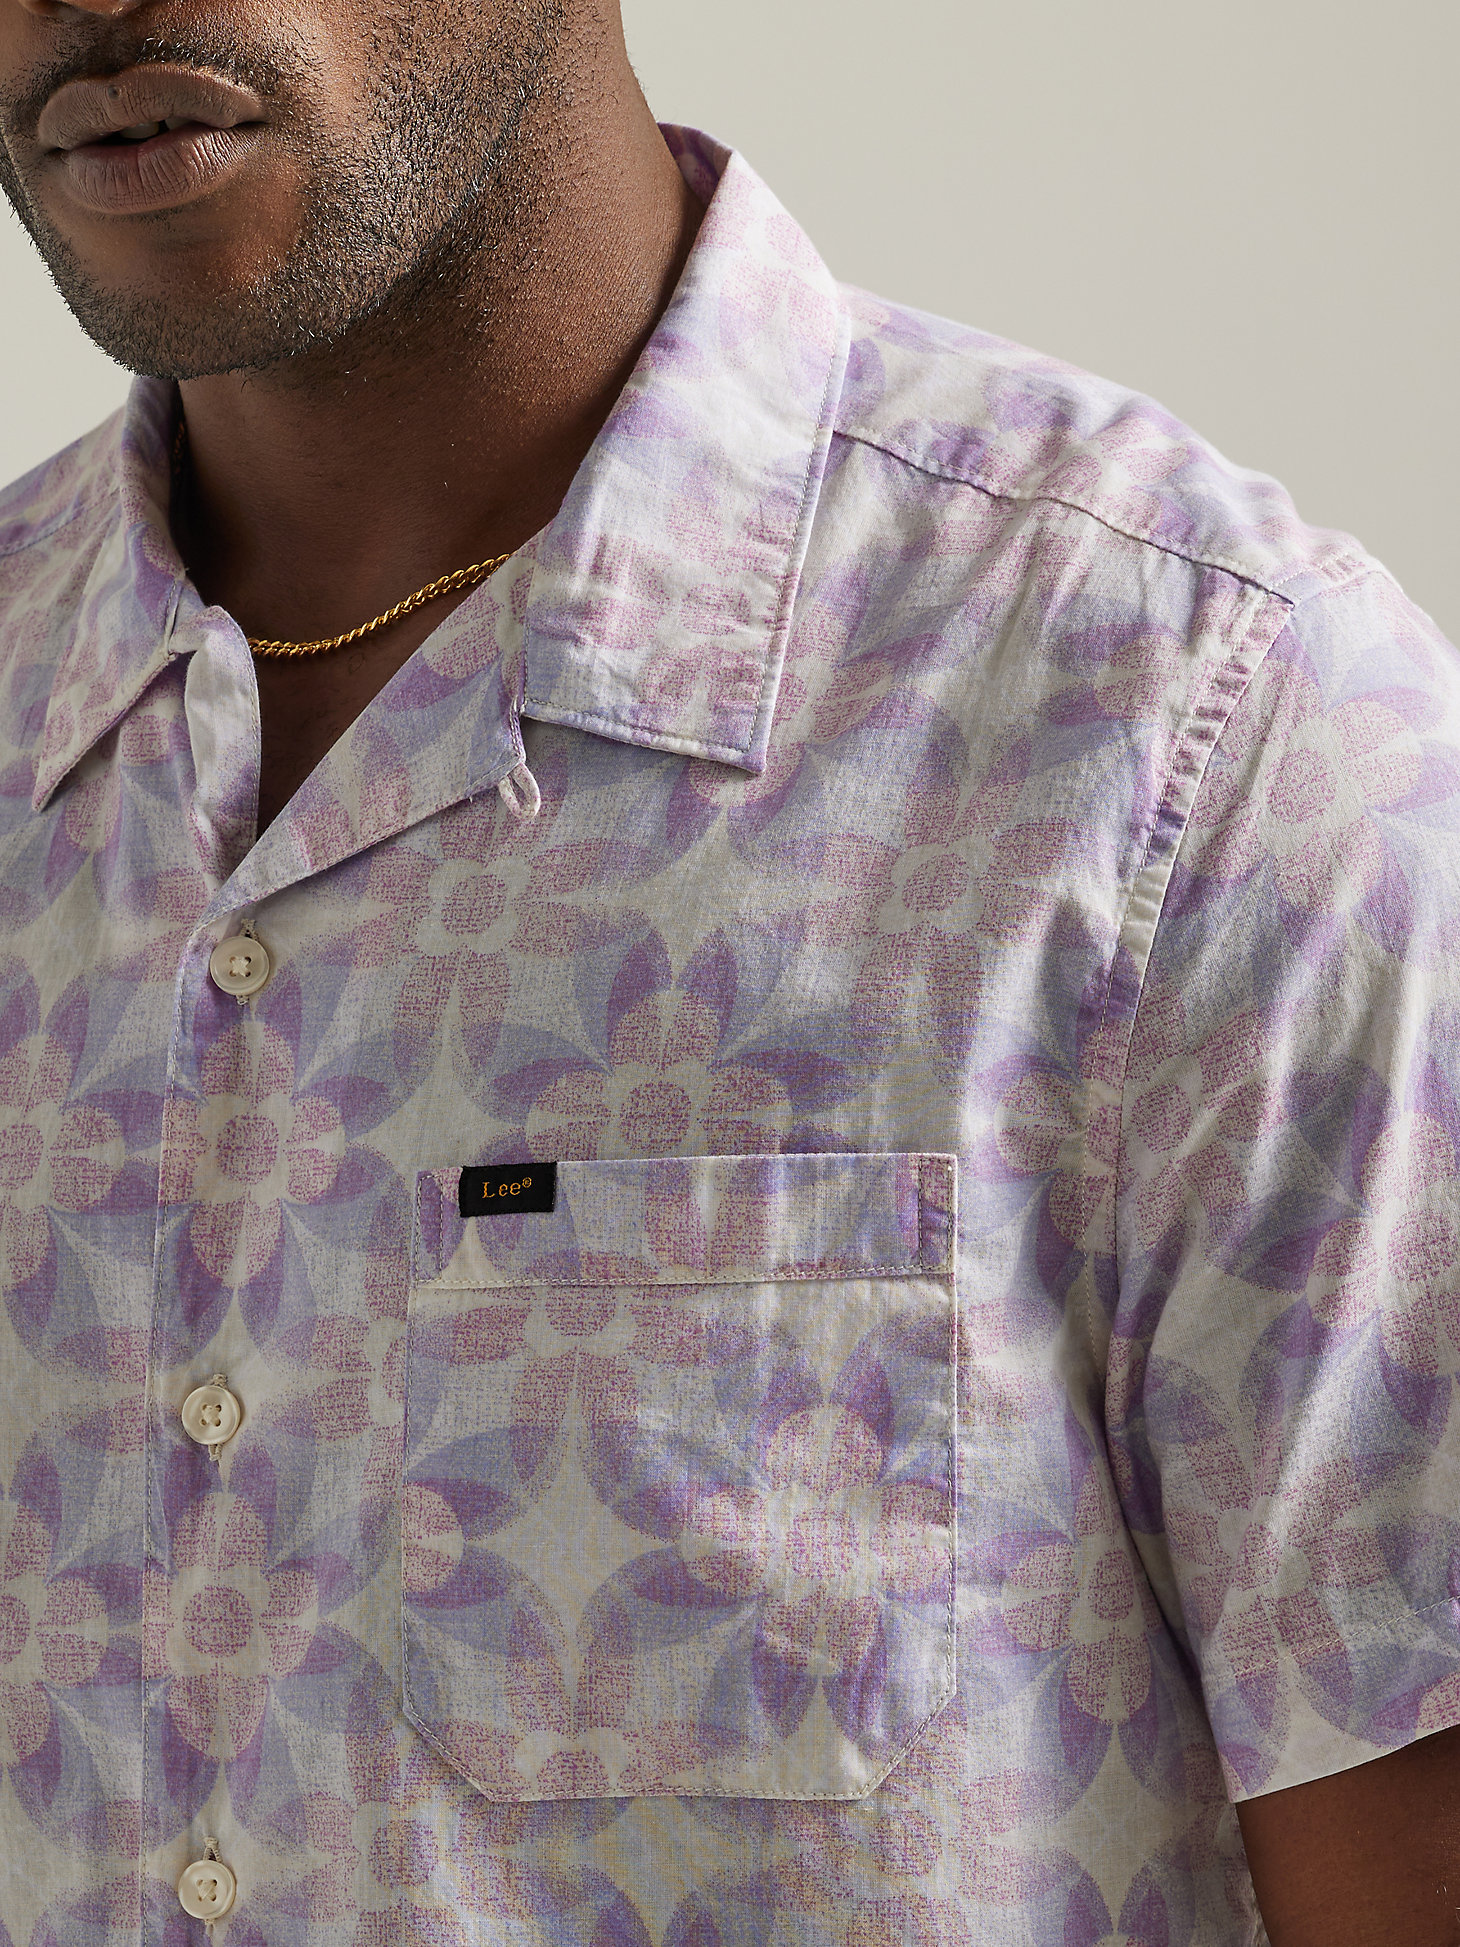 Men's Relaxed Fit Floral Resort Shirt in Foggy Gray alternative view 2